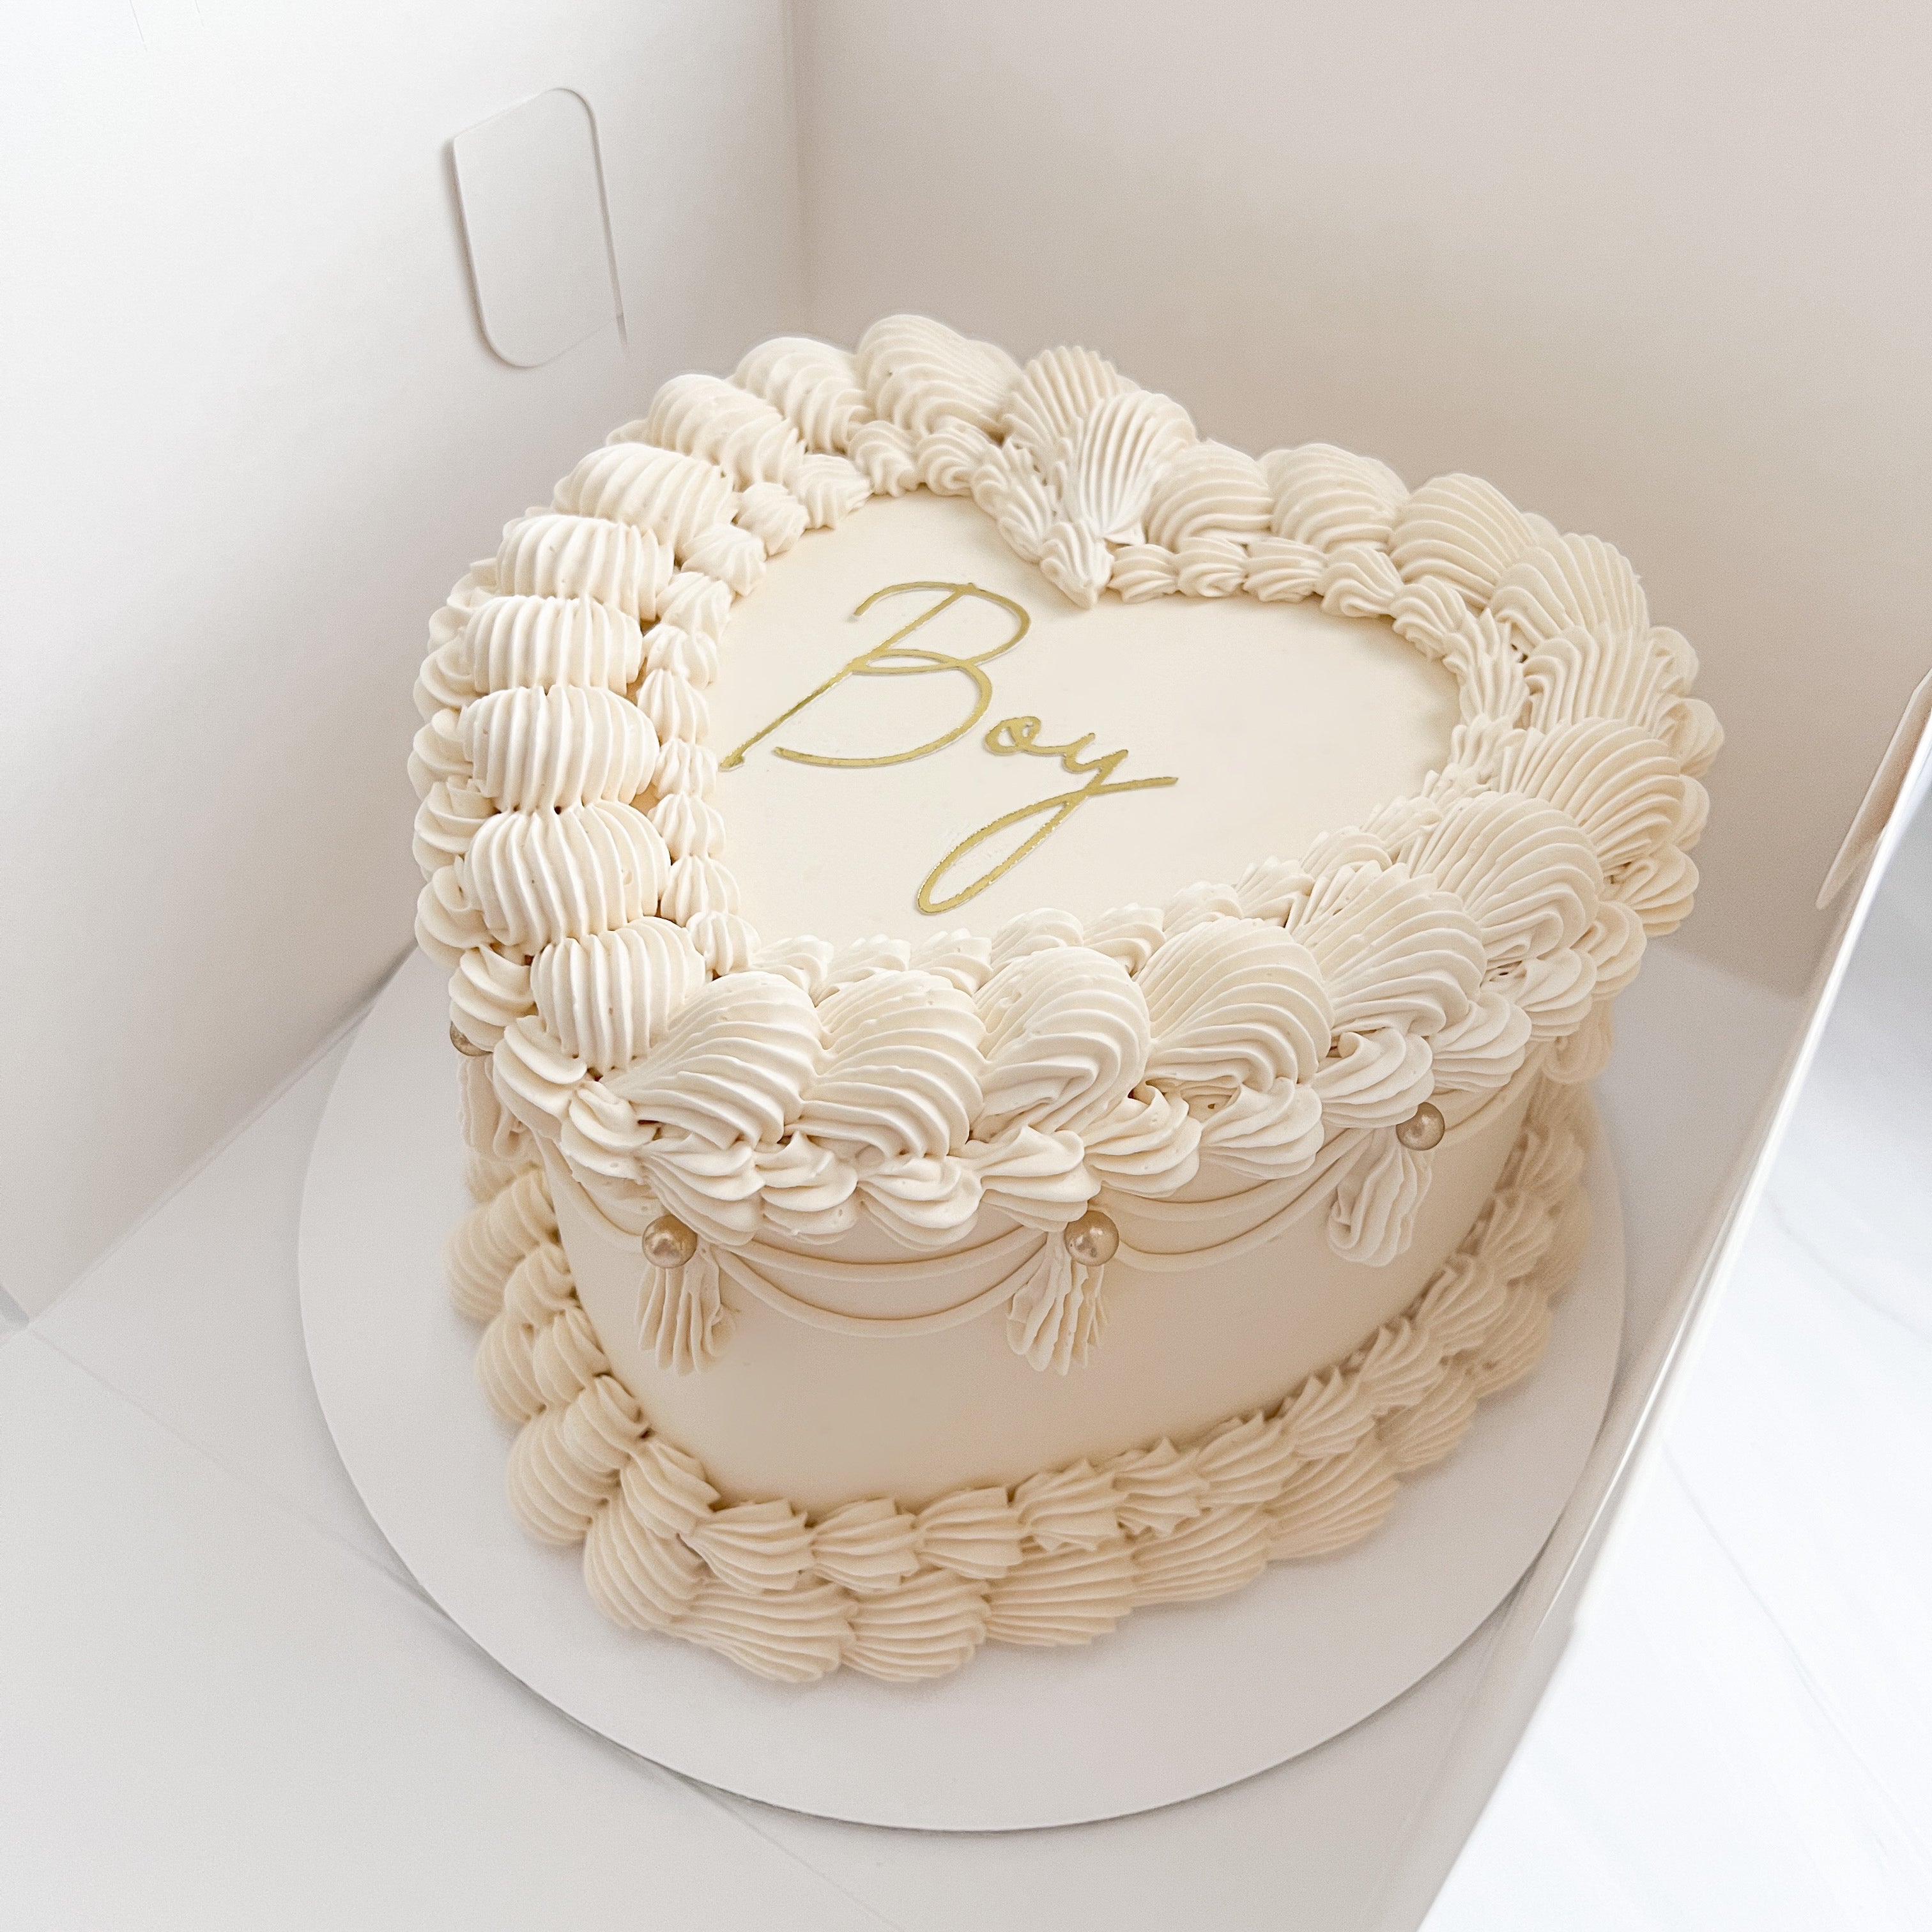 Order Best Birthday Cakes Online - 2 Hrs free Delivery - Winni